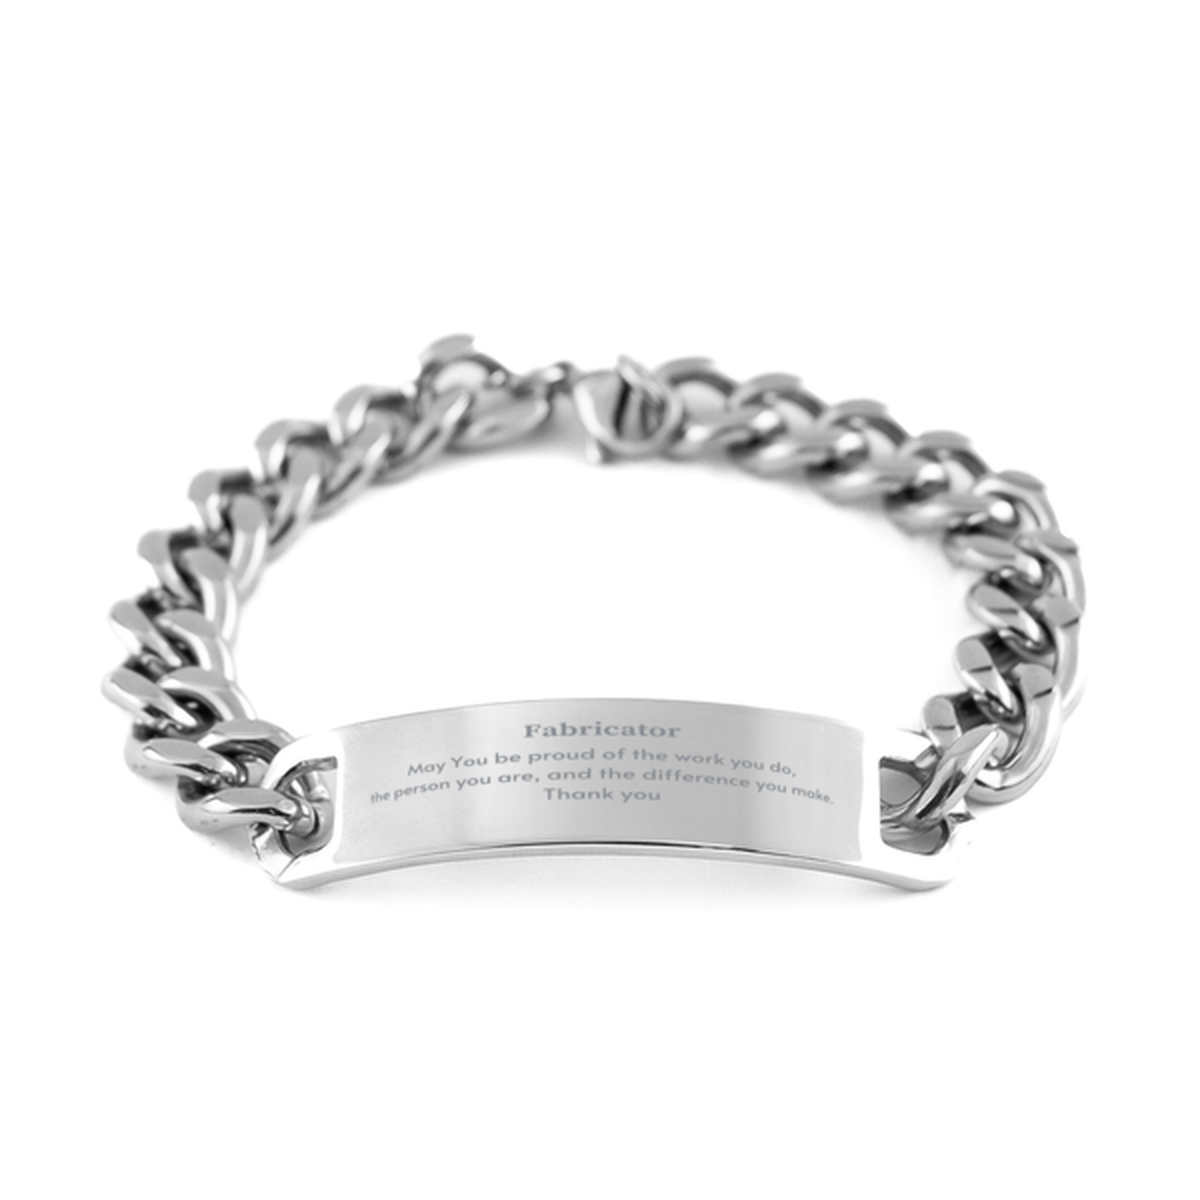 Heartwarming Cuban Chain Stainless Steel Bracelet Retirement Coworkers Gifts for Fabricator, Fabricator May You be proud of the work you do, the person you are Gifts for Boss Men Women Friends